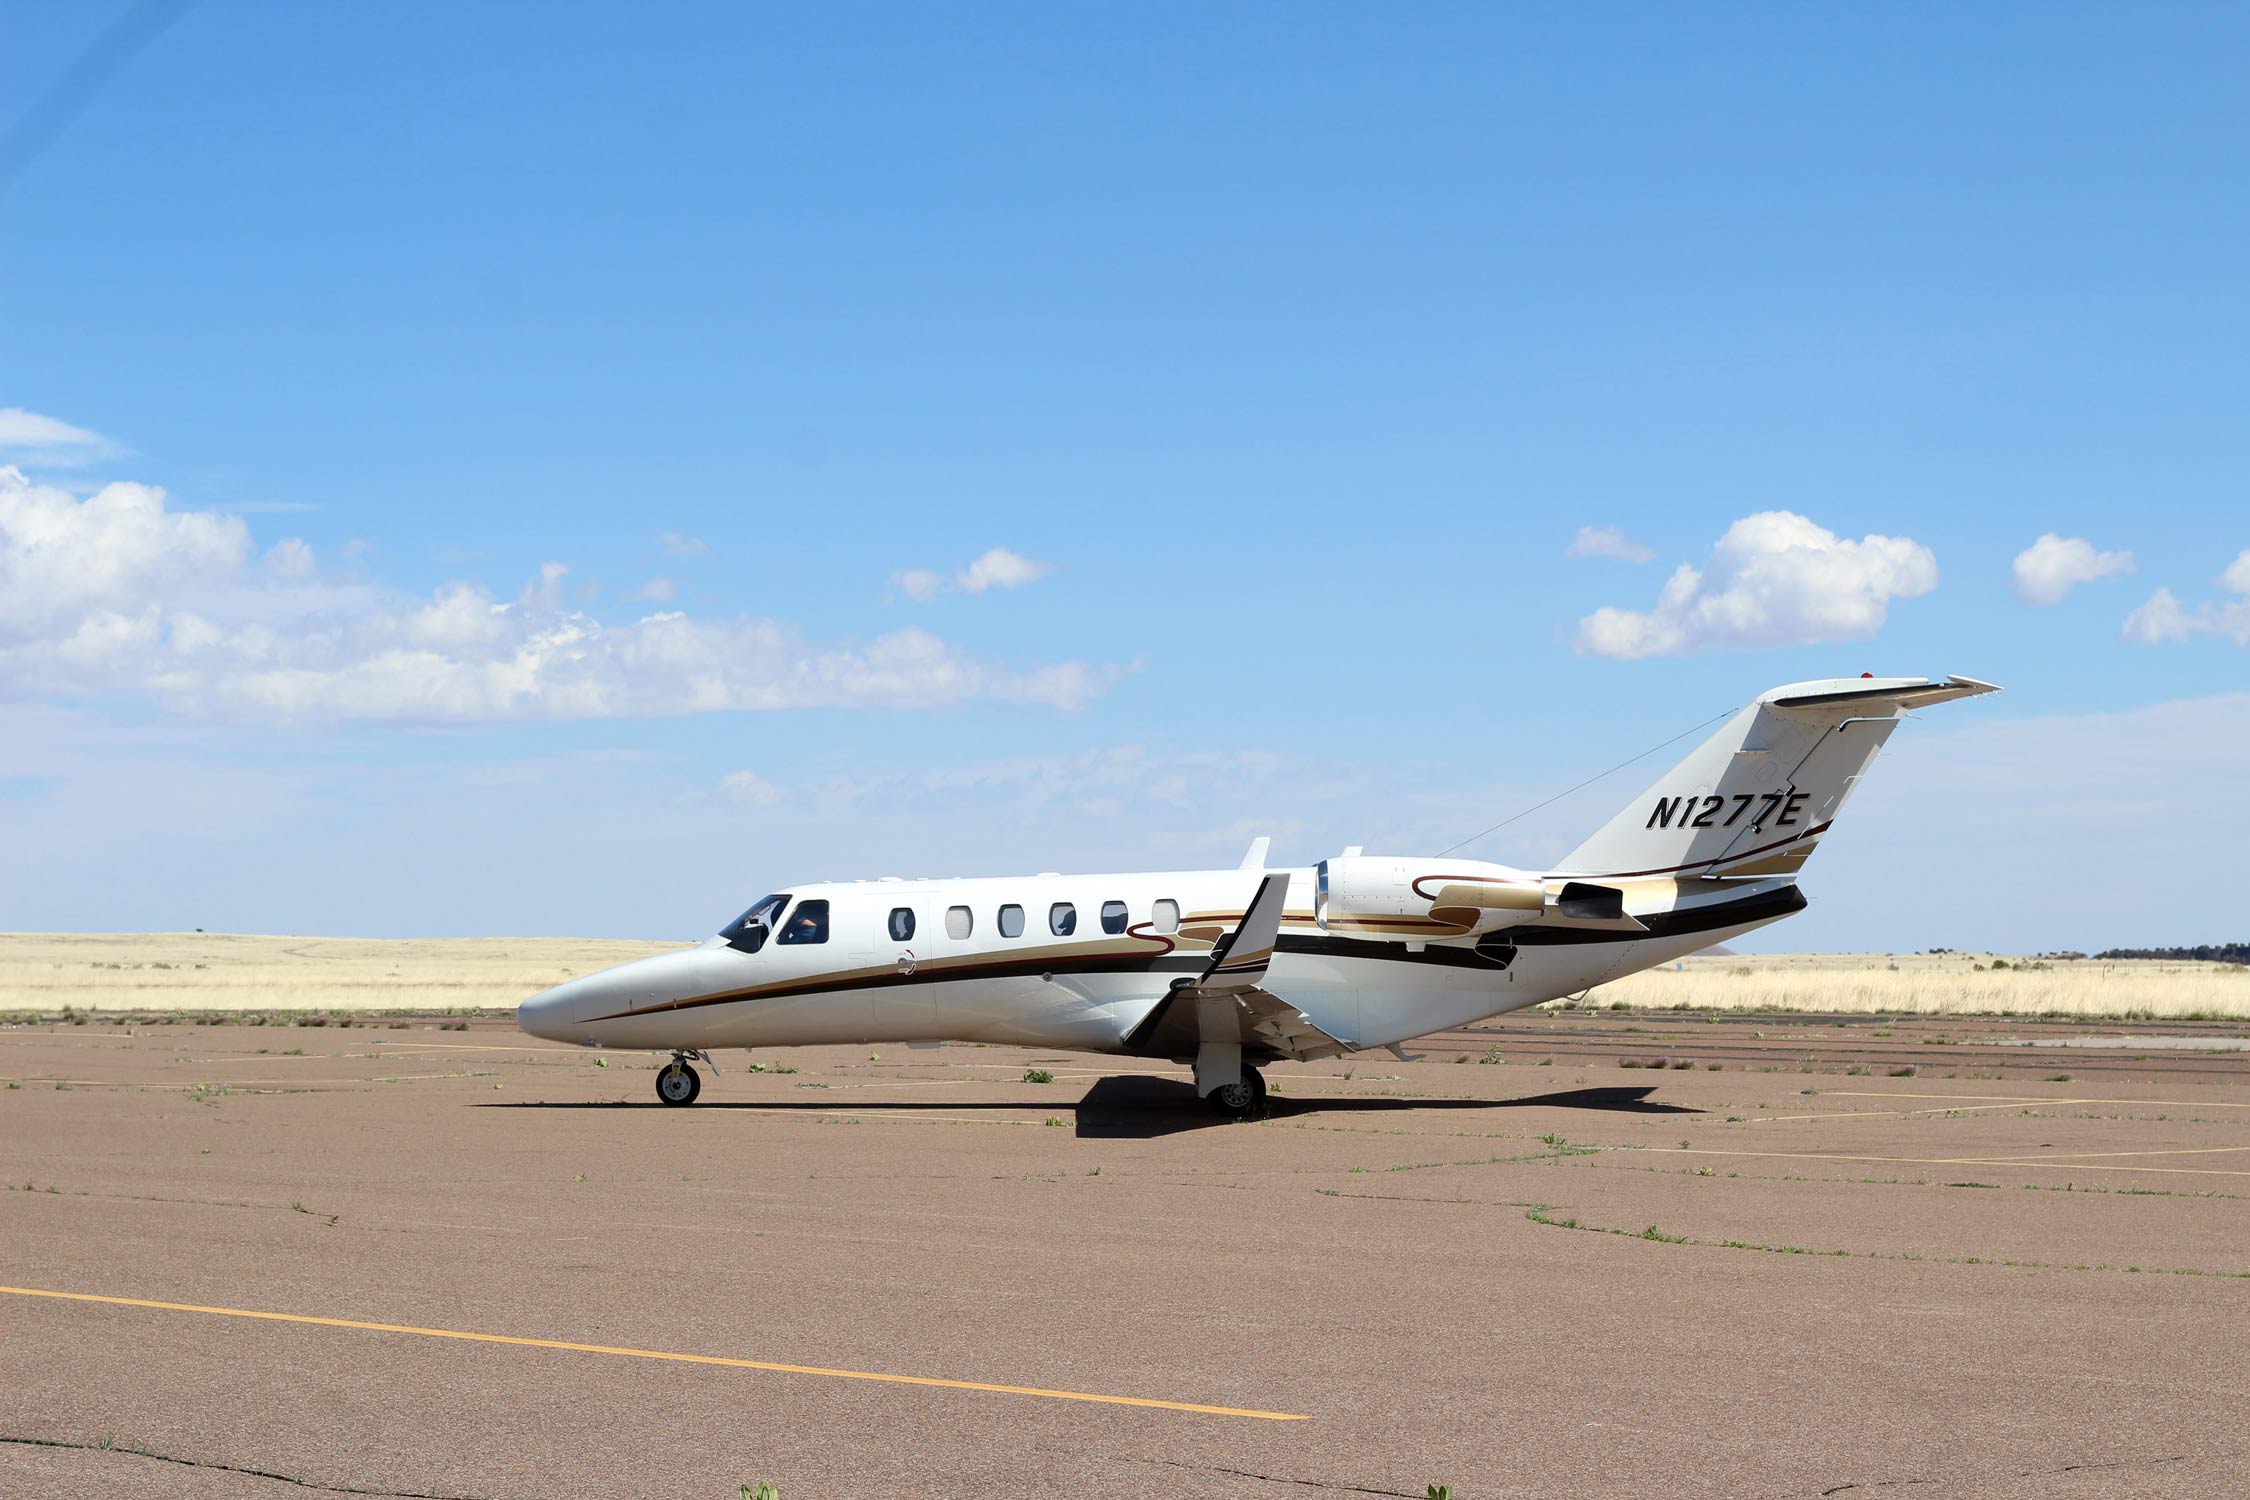 On Wednesday, May 10, five Mexican wolf pups arrived at the Springerville Municipal Airport, by way of private jet, courtesy of LightHawk Conservation Flying.